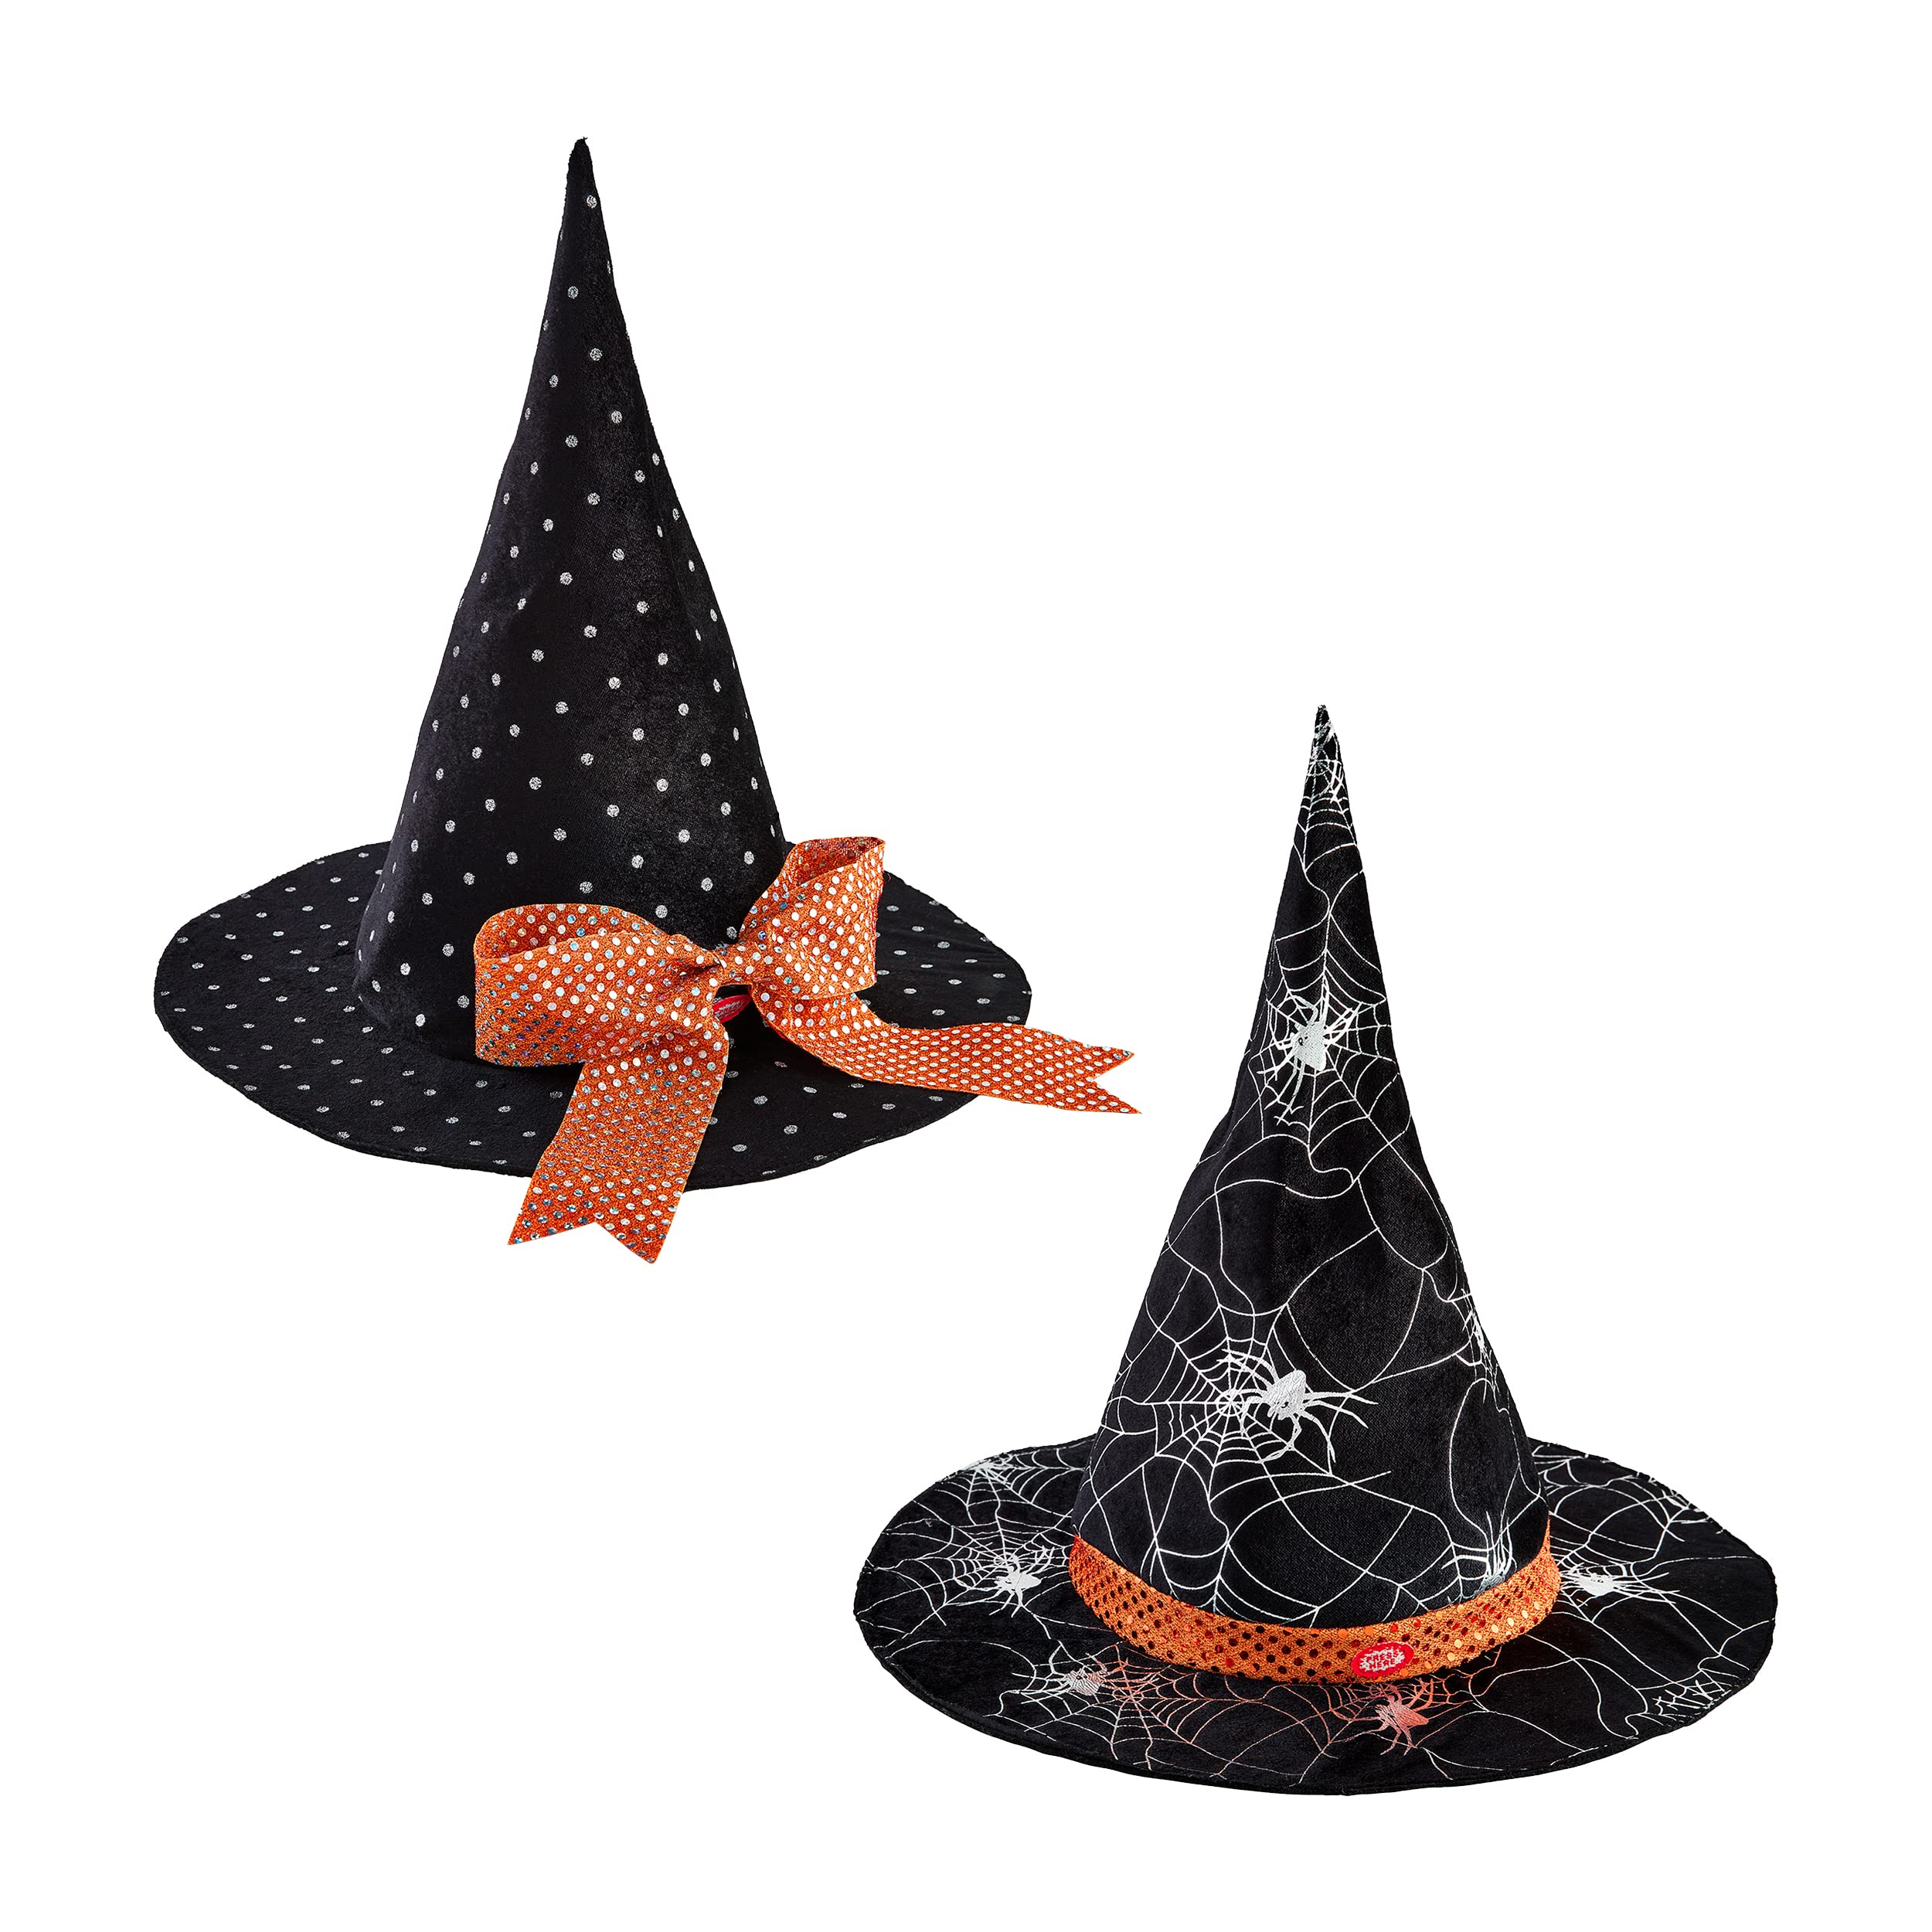 Mud Pie Dancing Witch Hat, Polka Dot, Fits ages 3-10